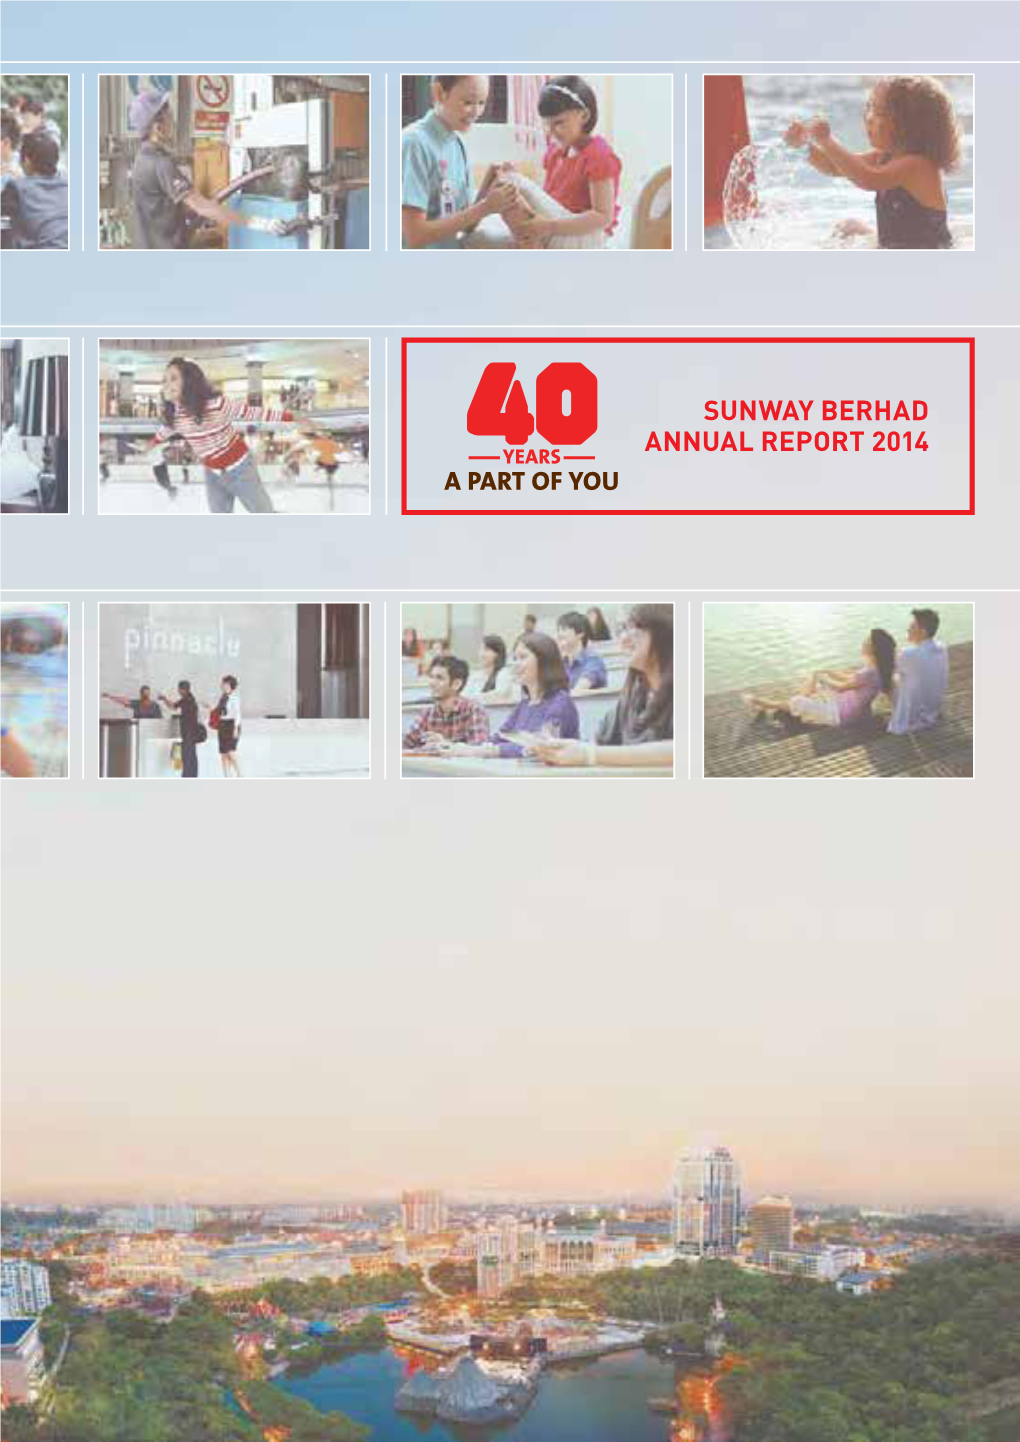 Sunway Berhad Annual Report 2014 a Part of You